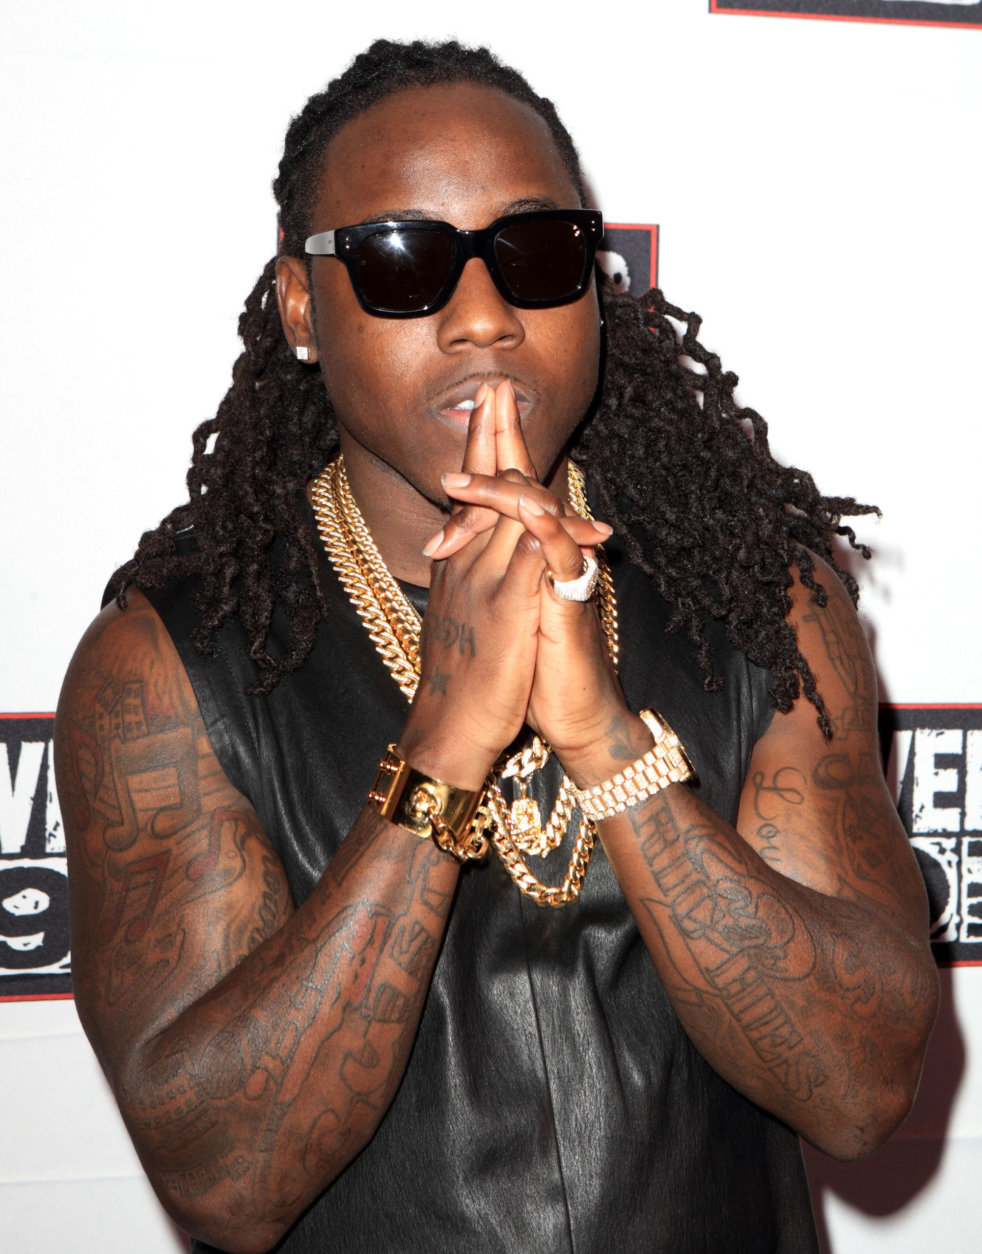 Ace Hood performs during the Power 99 Powerhouse 2013 concert at the Wells Fargo Center on Friday, October 25, 2013, in Philadelphia. (Photo by Owen Sweeney/Invision/AP)